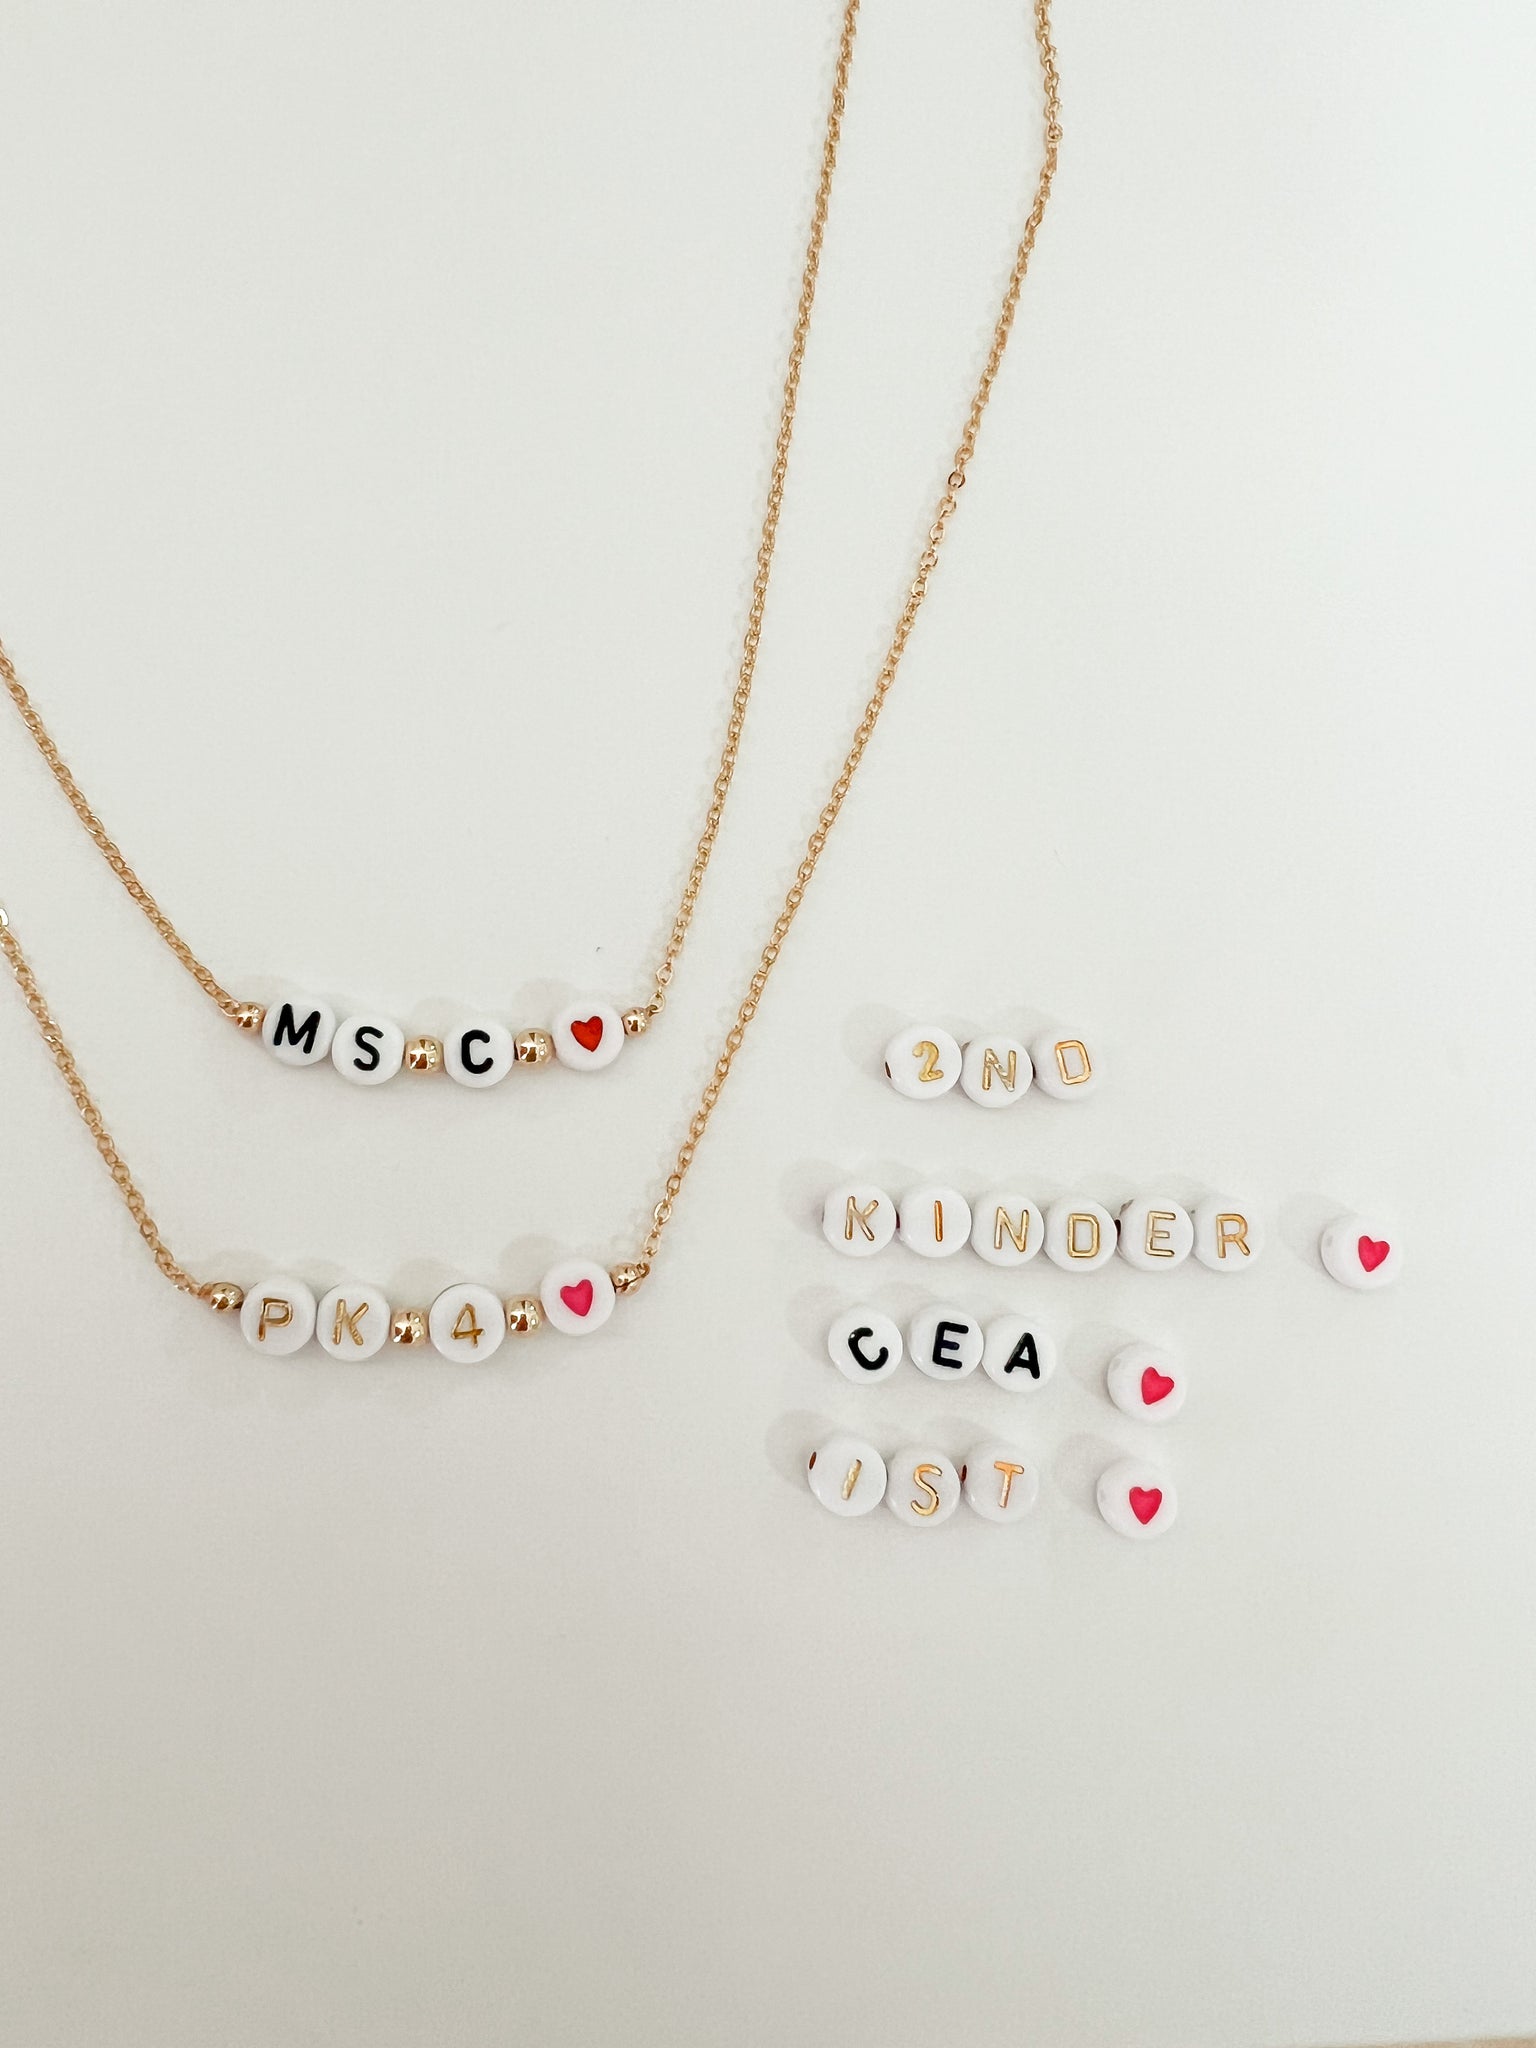 Back to School Necklace